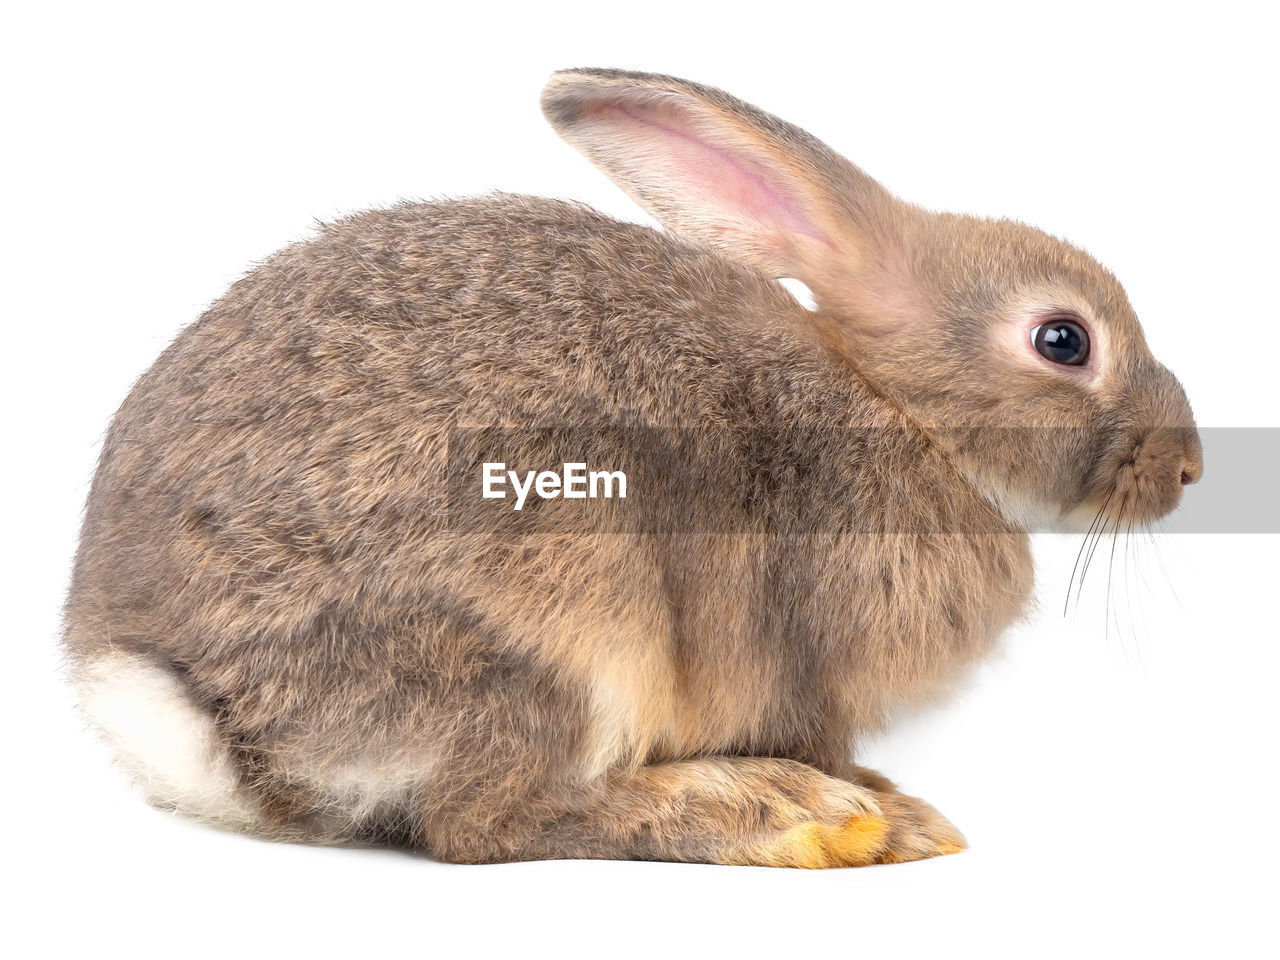 SIDE VIEW OF A RABBIT OVER WHITE BACKGROUND